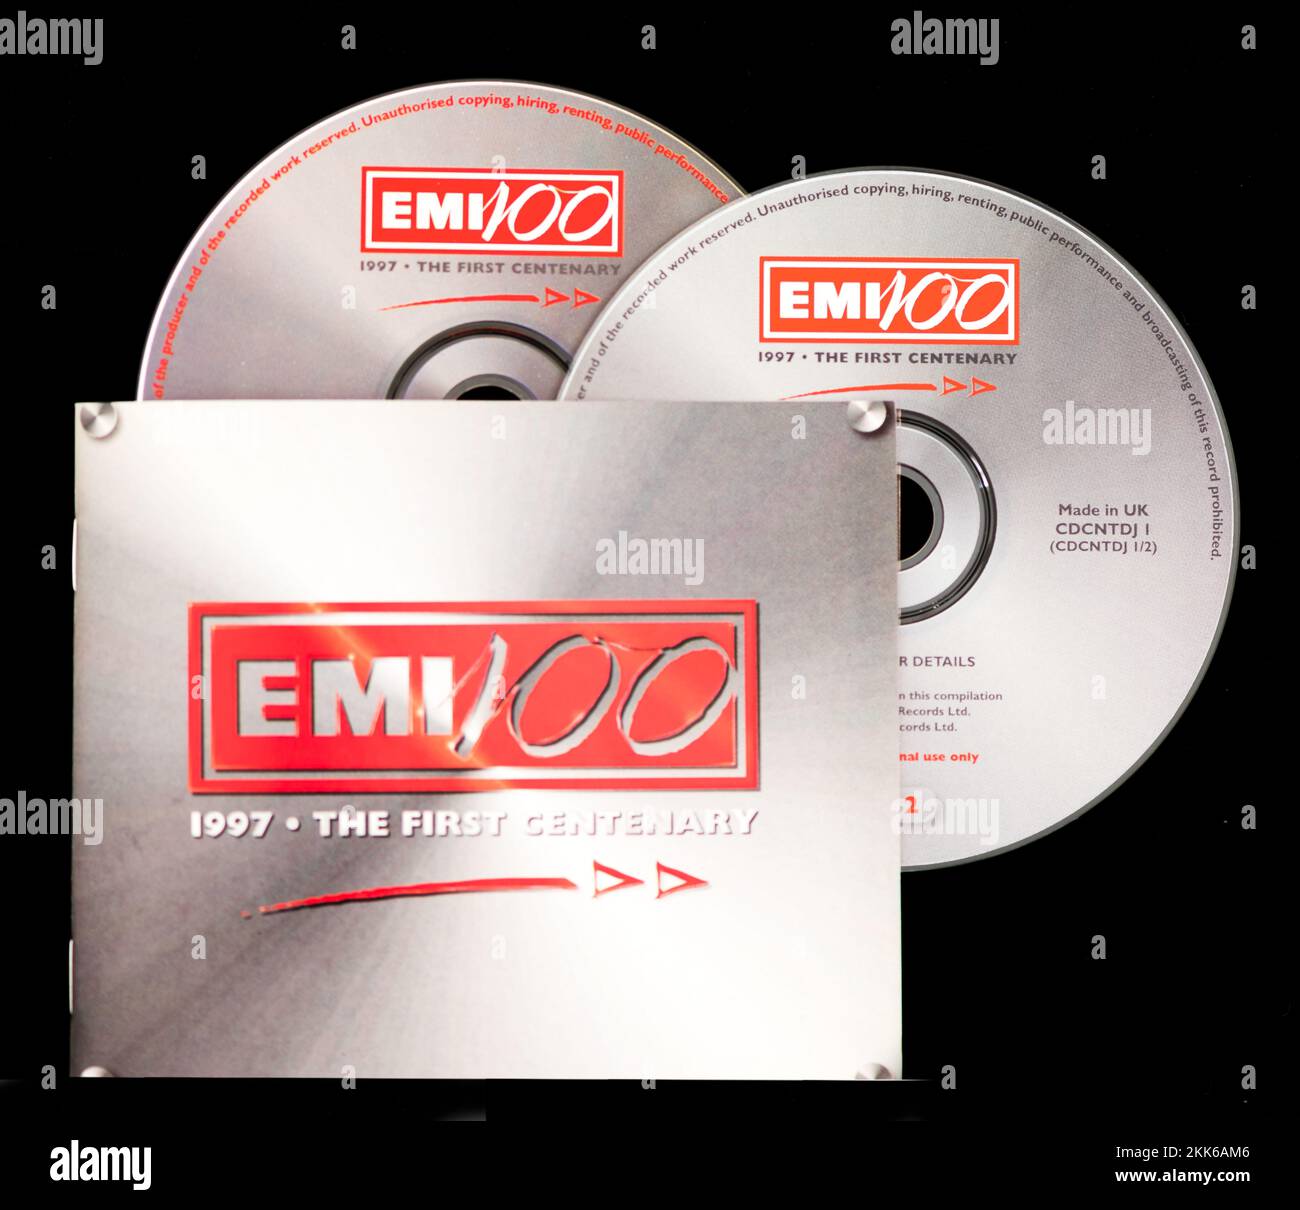 EMI CD  Disc Booklet -EMI 100 1997- The First Centenary. Stock Photo